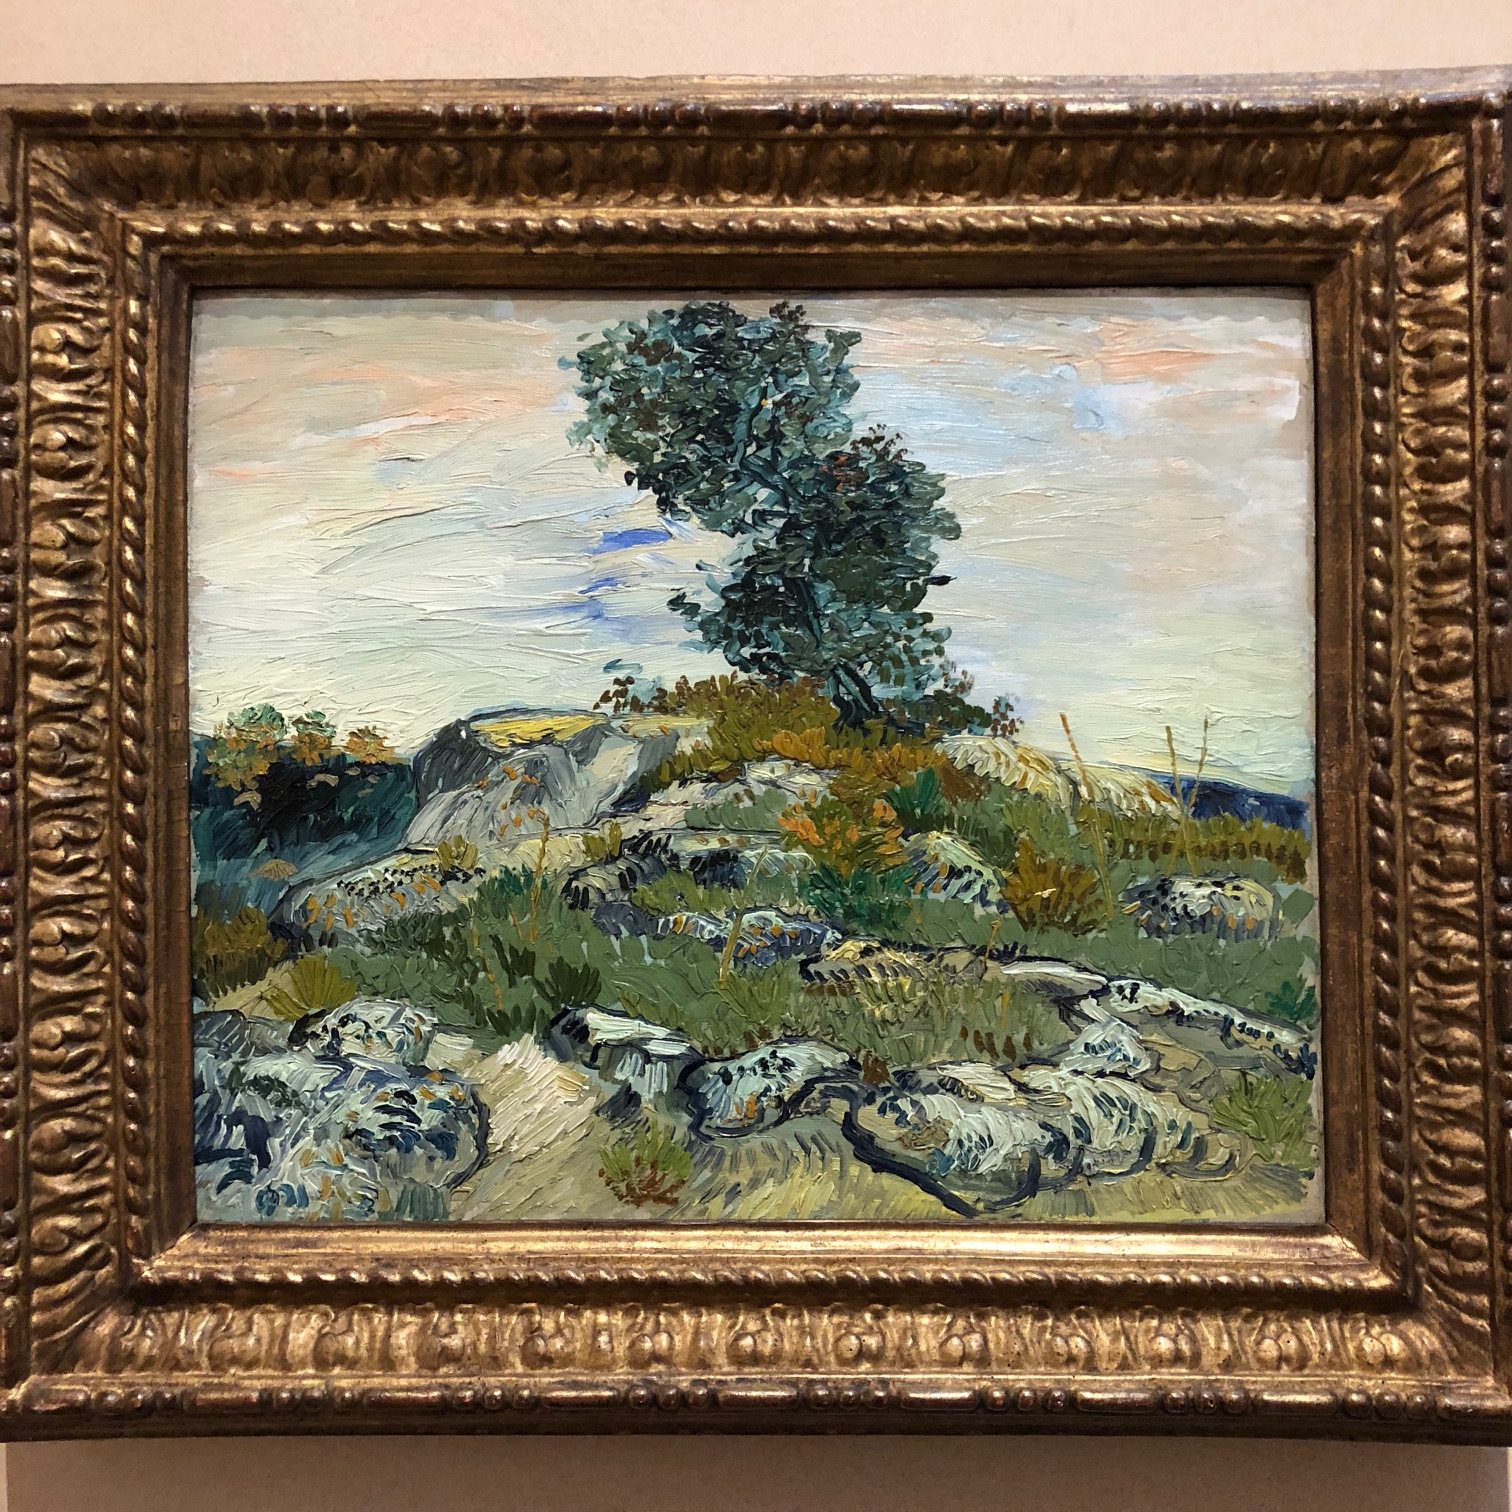 Close-up Details of Van Gogh's Painting "The Rocks"